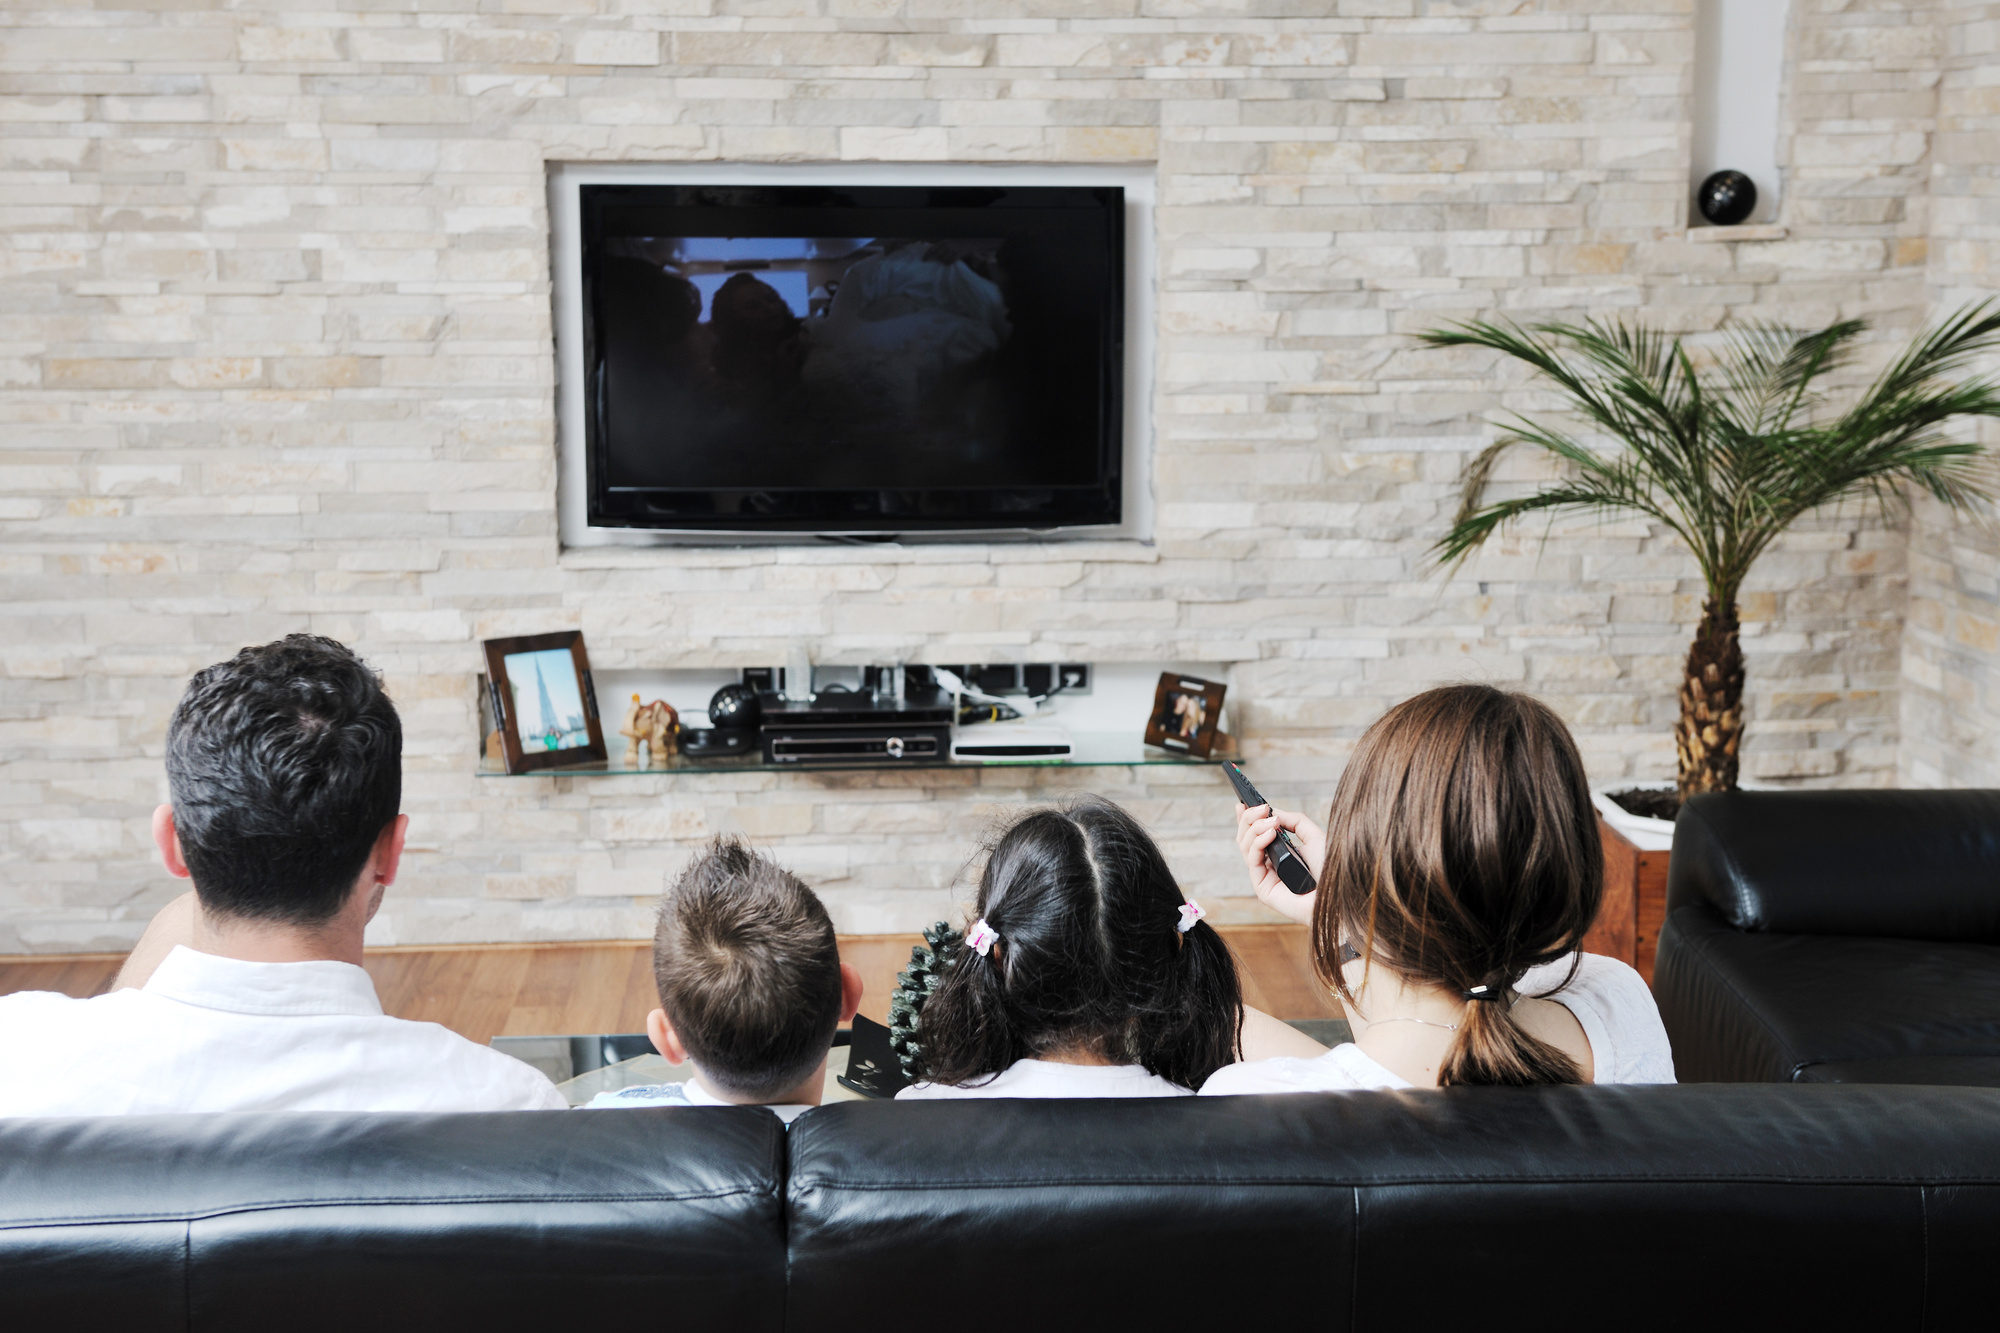 7 Reasons Why Watching Movies at Home is Way Better